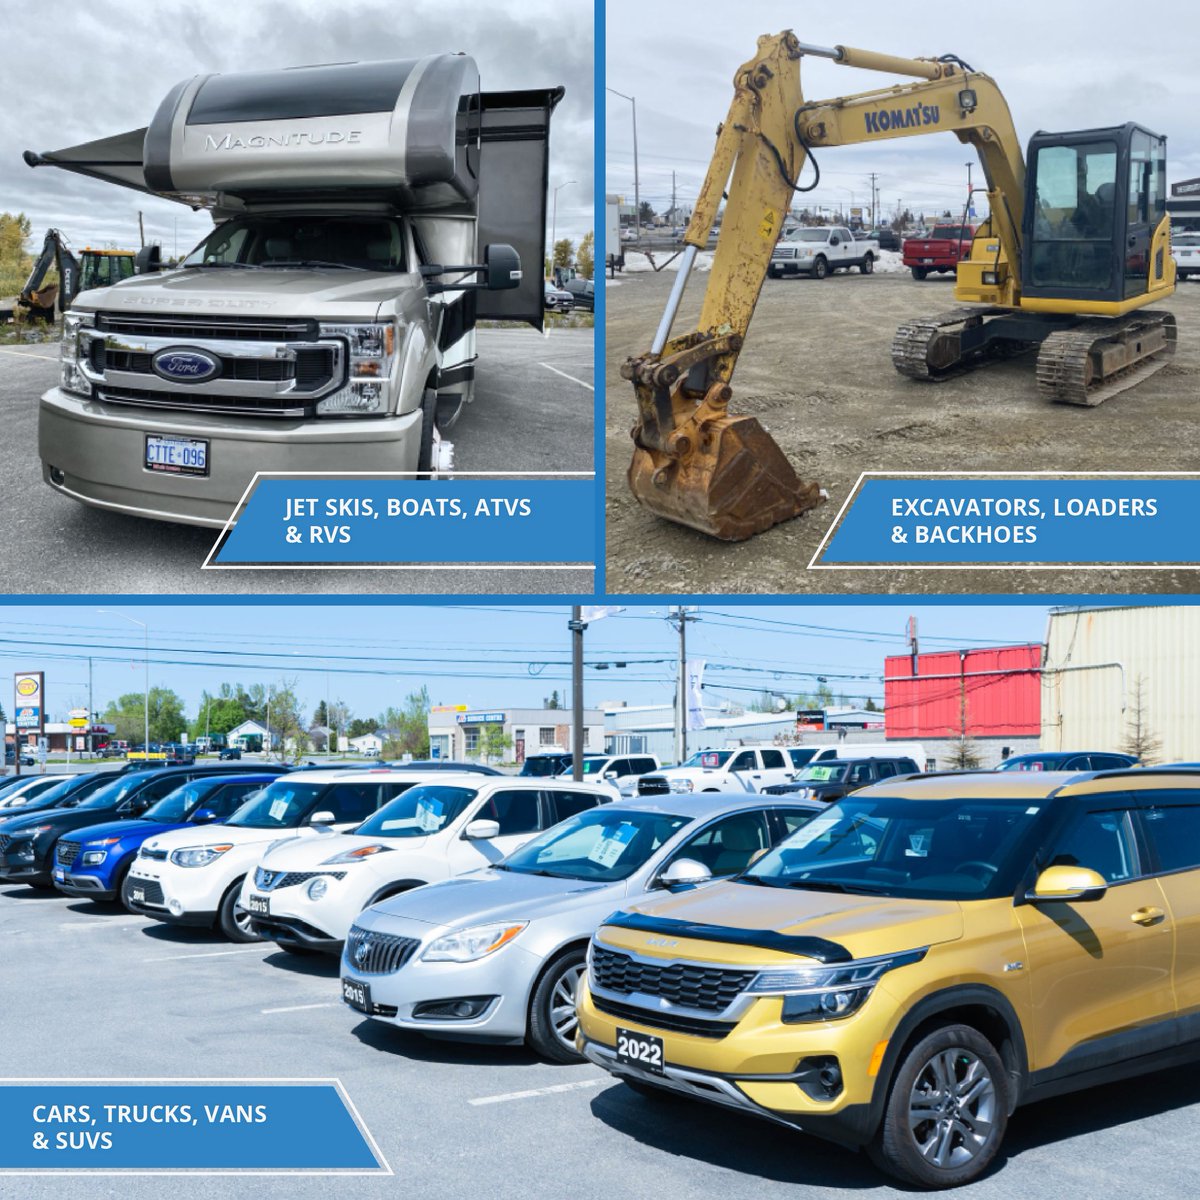 Looking for a wide range of options? Look no further! At The Car Lot, we have an incredible selection of pre-owned vehicles that will suit your every need. 🚗⛵🏗️

#TheCarLot #WideSelection #Inventory #UsedCarDealership #PreOwnedVehicles